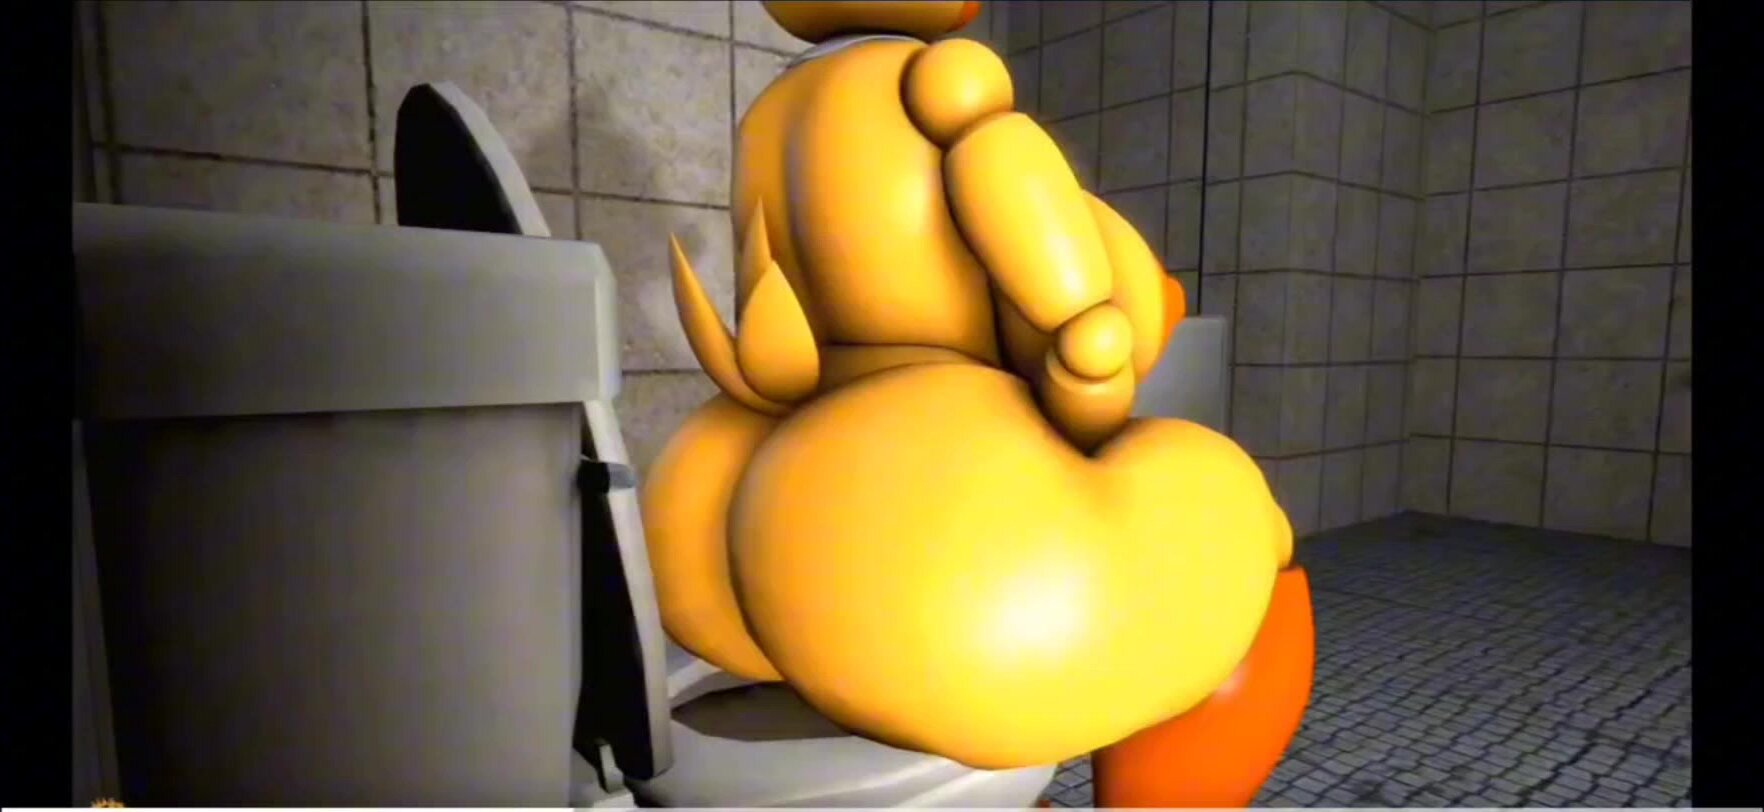 Chica taking a dump in the toilet